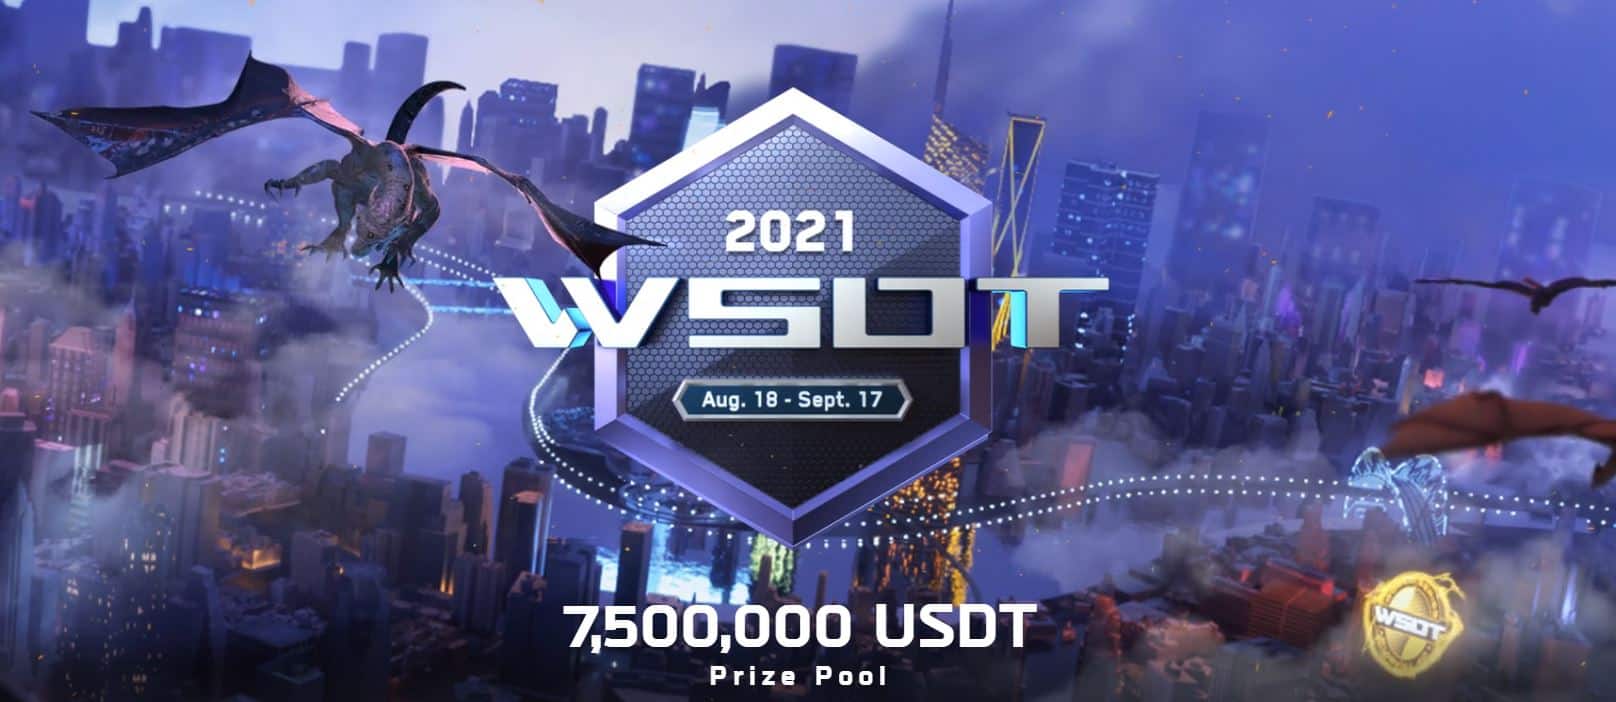 Bitcoin (BTC): join CoinTribune’s Troop for WSOT 2021 and help win a share of the 7.5M USDT prize pool!